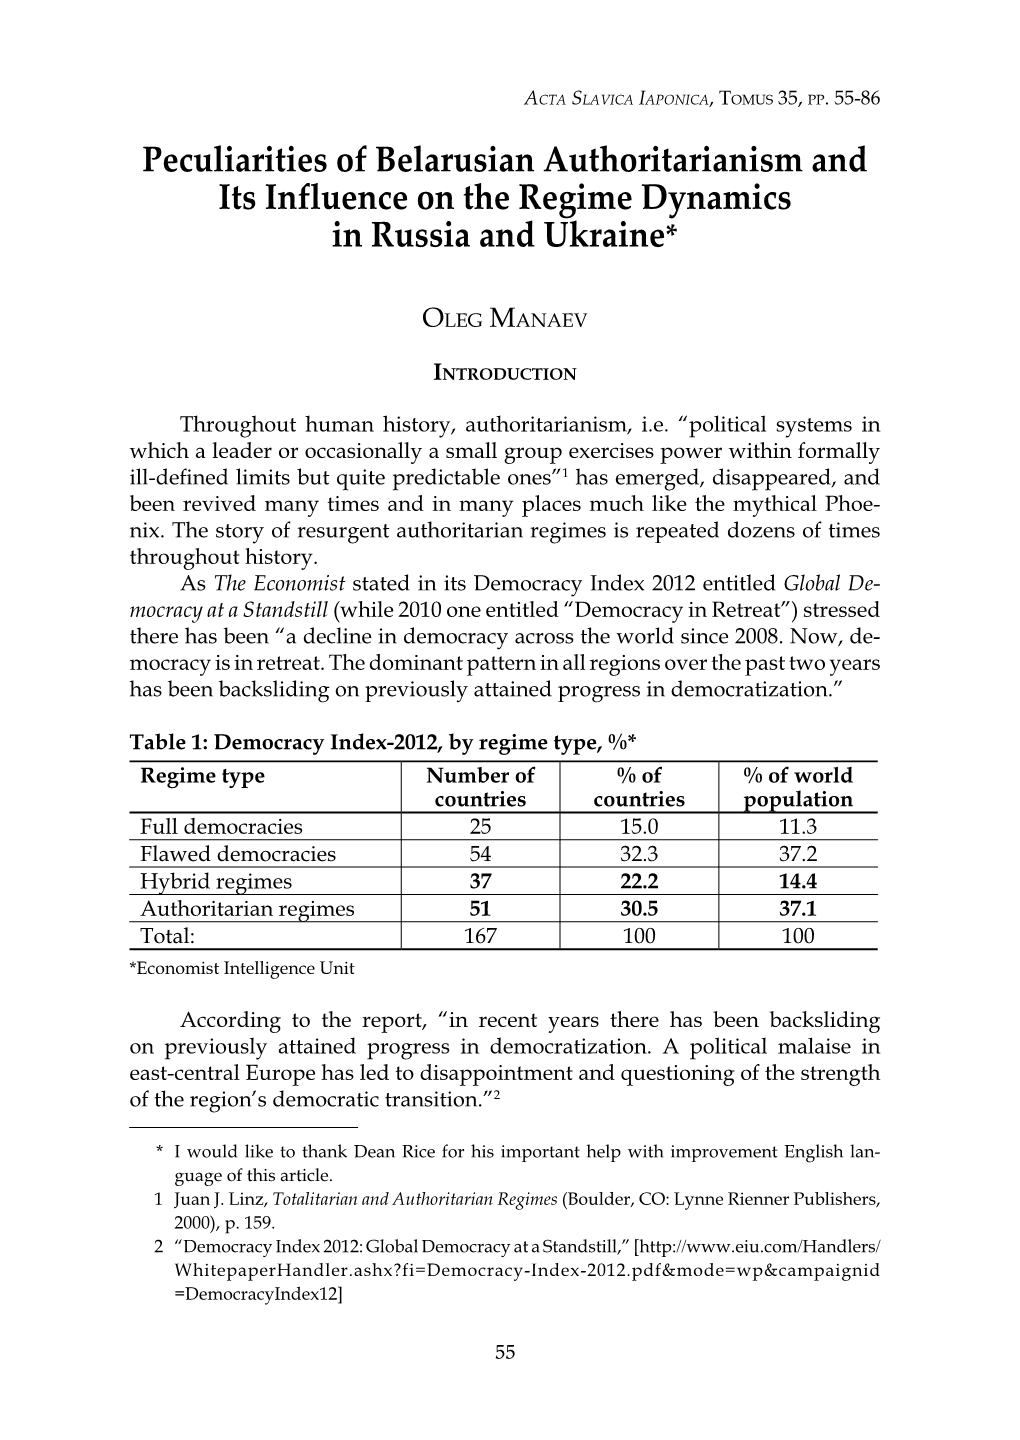 Peculiarities of Belarusian Authoritarianism and Its Influence on the Regime Dynamics in Russia and Ukraine*